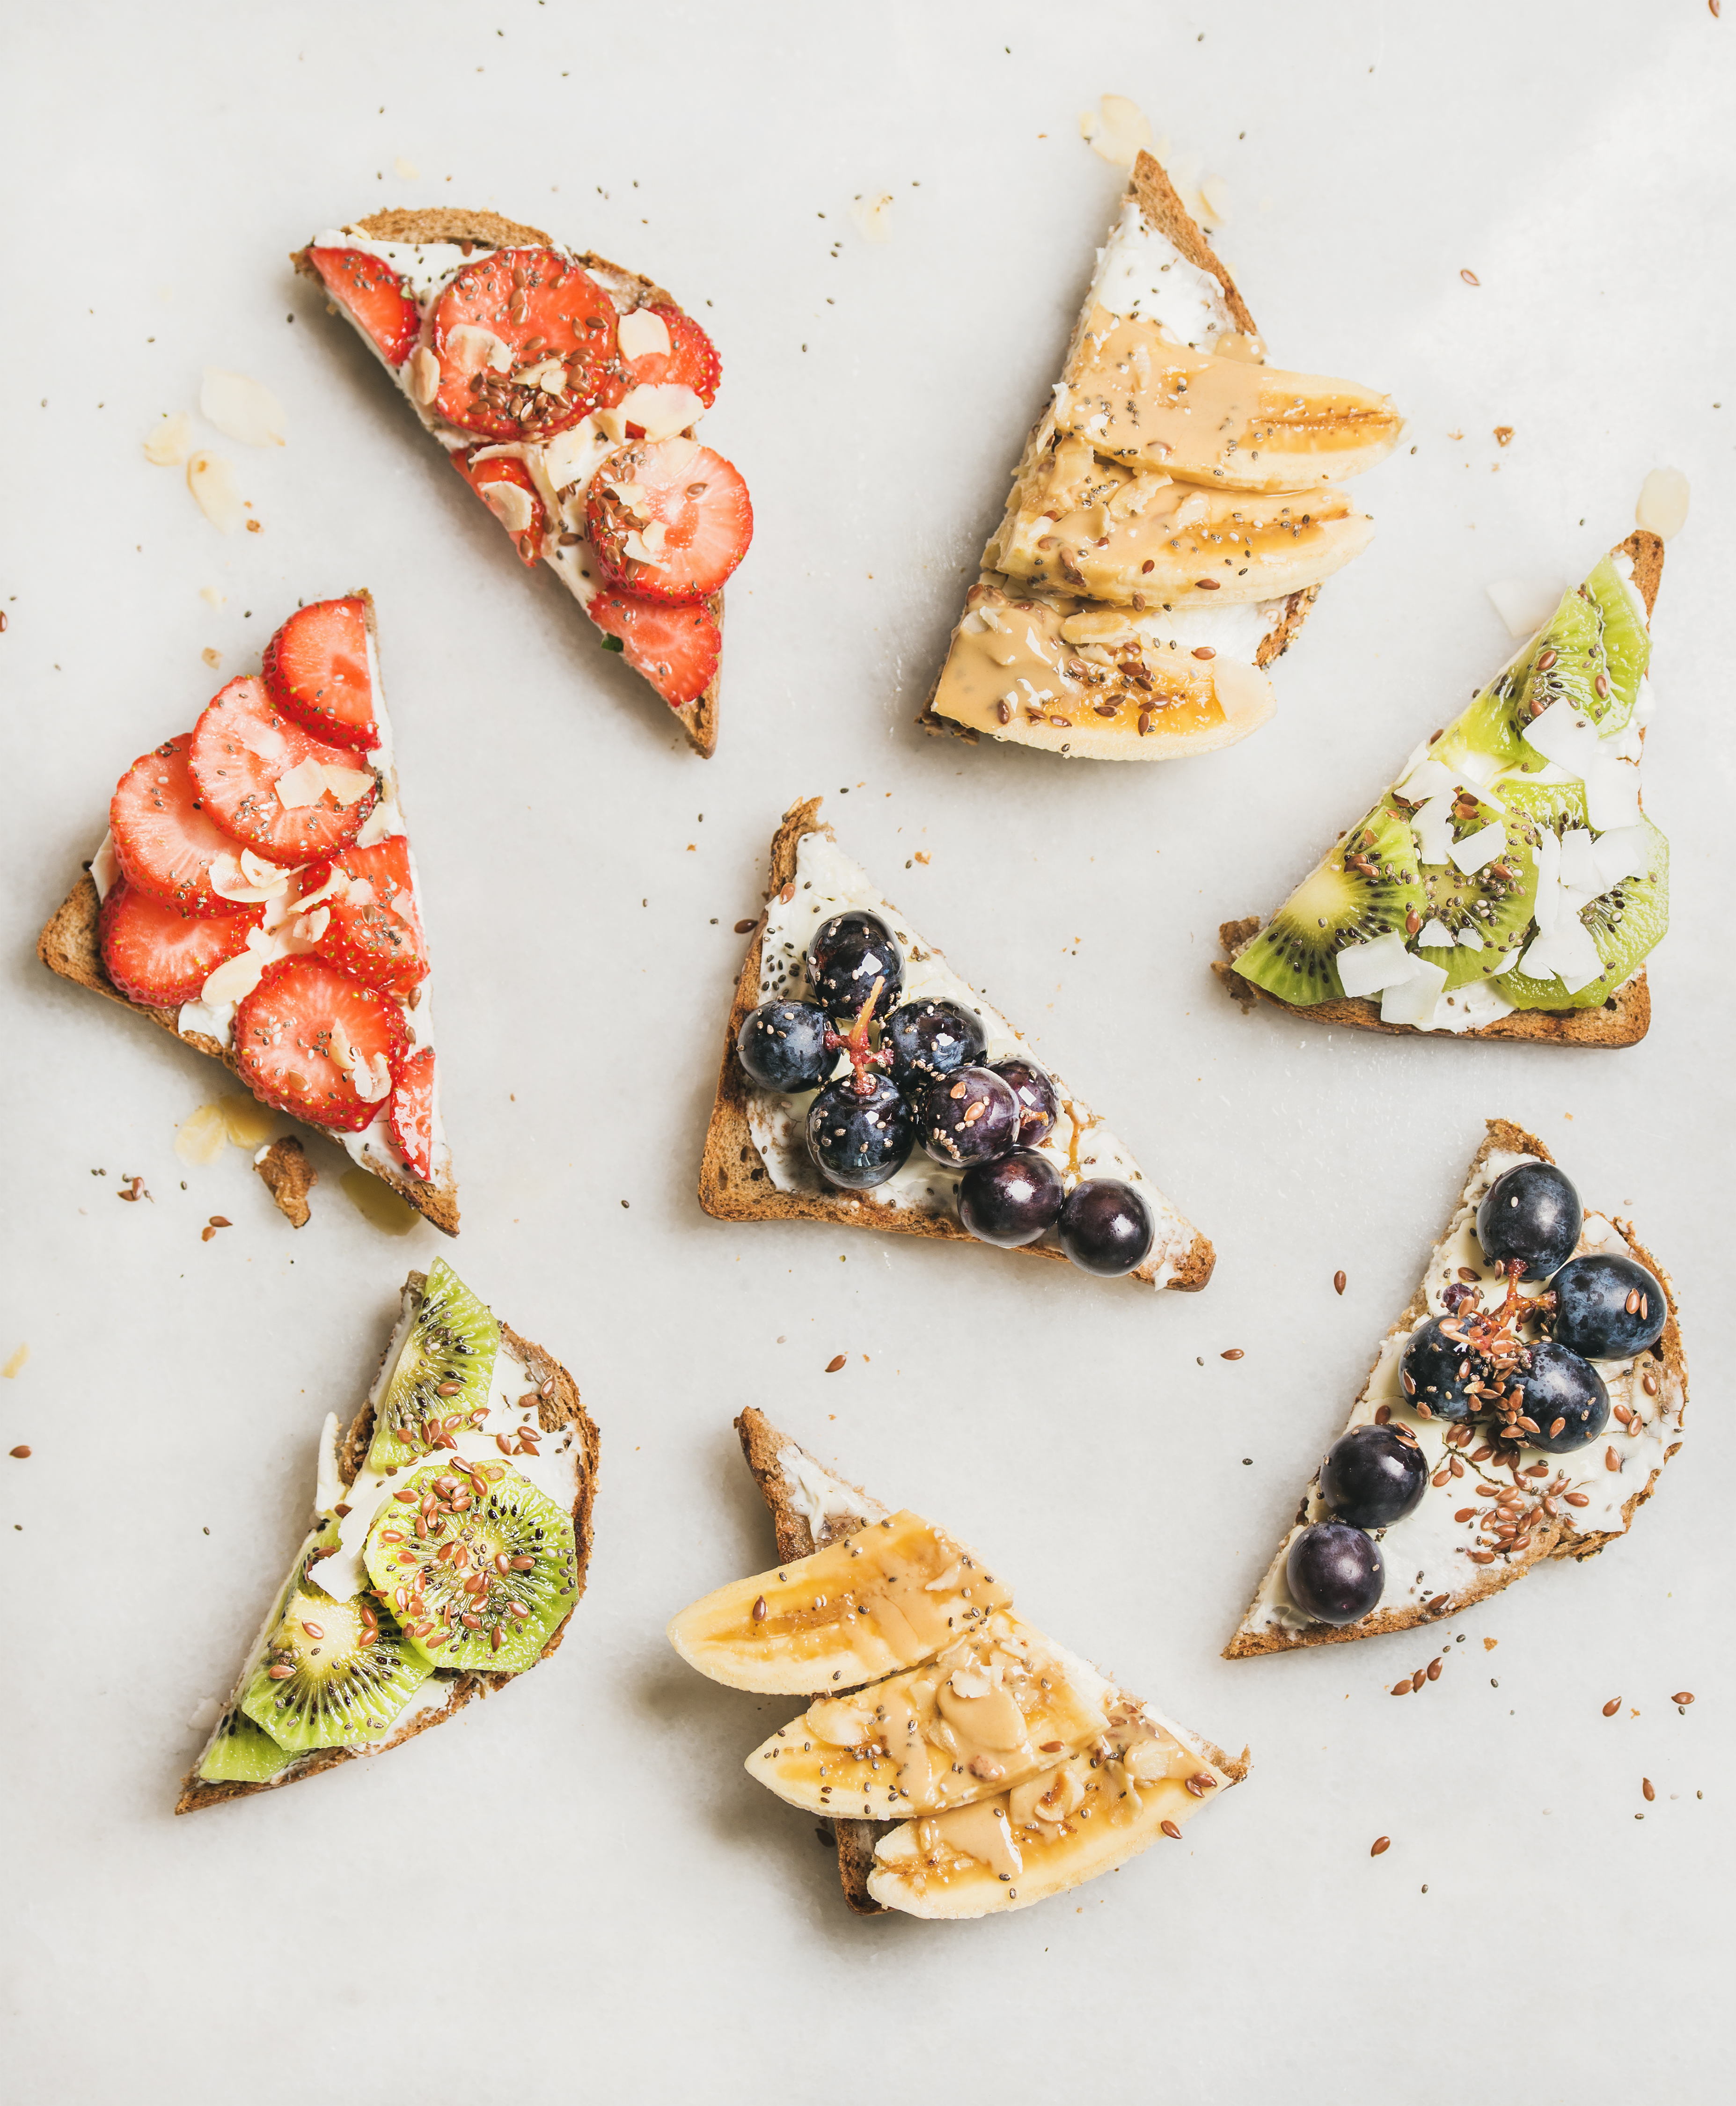 Healthy breakfast toasts cut in pieces. Wholegrain bread slices with cream cheese, various fruit, seeds and nuts. Top view, grey marble background. Clean eating, vegetarian, dieting concept